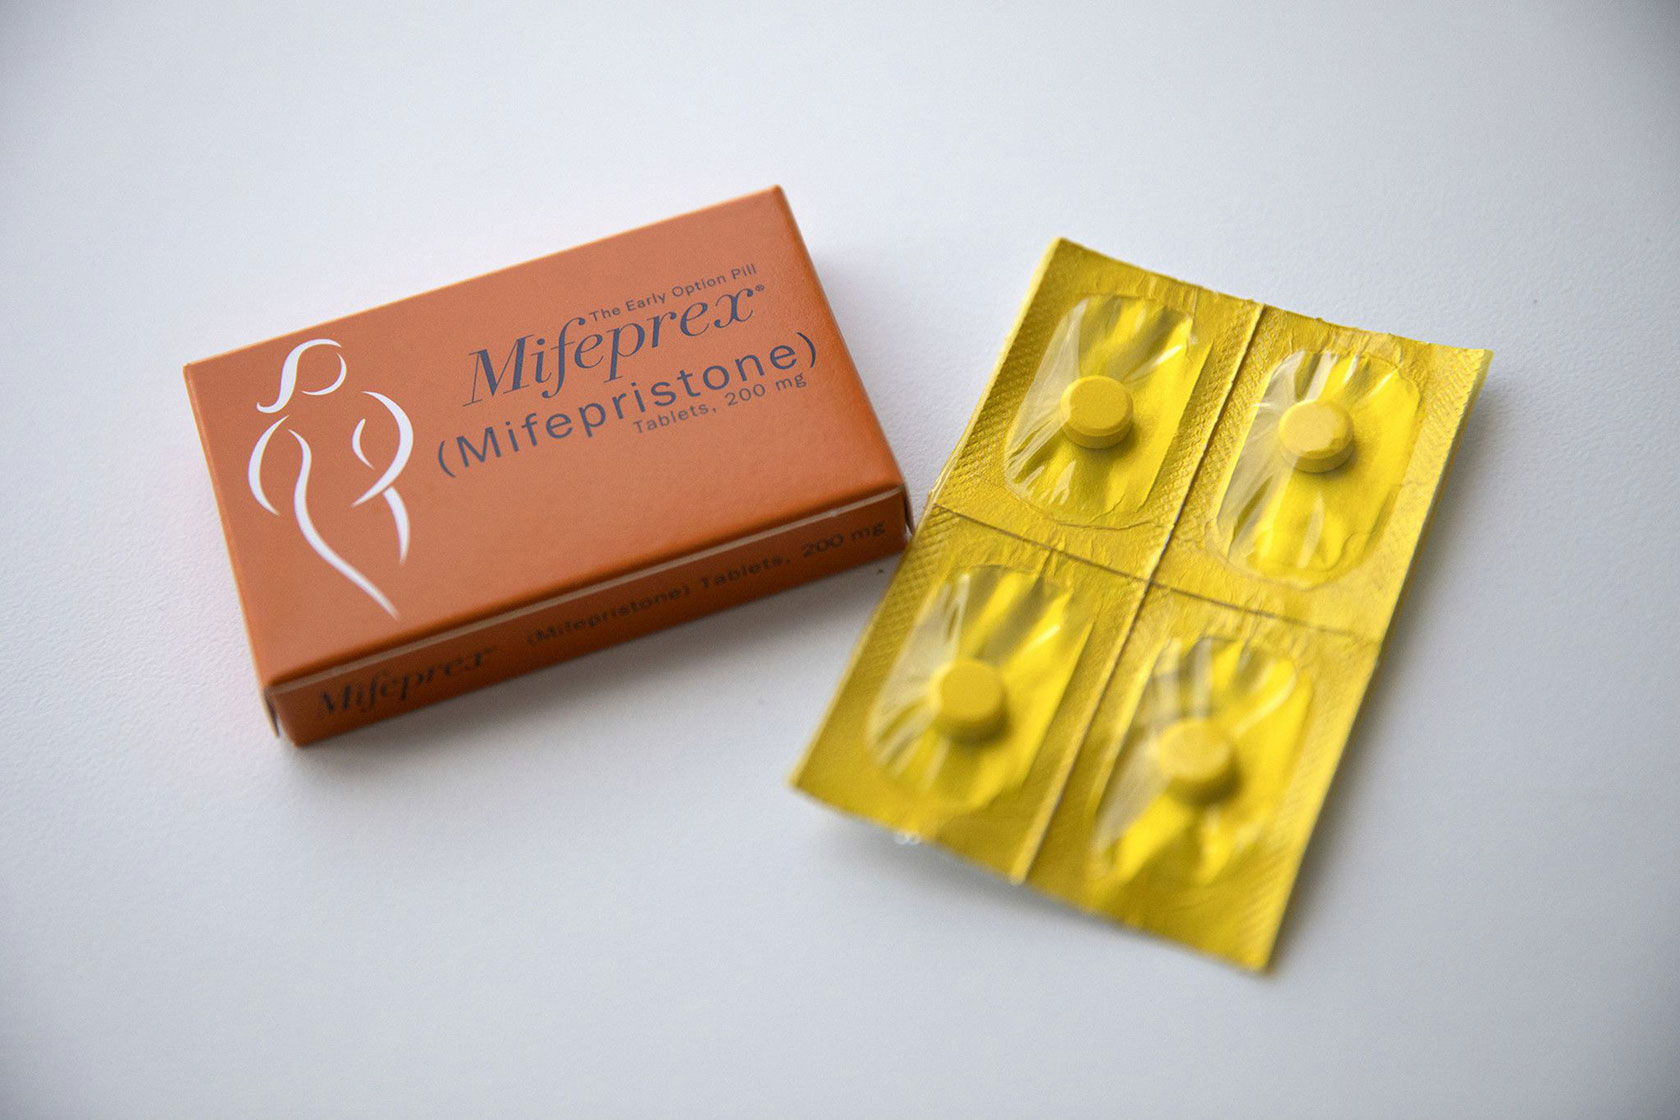 Photo shows an orange box of mifepristone pills next to a yellow container with four pills